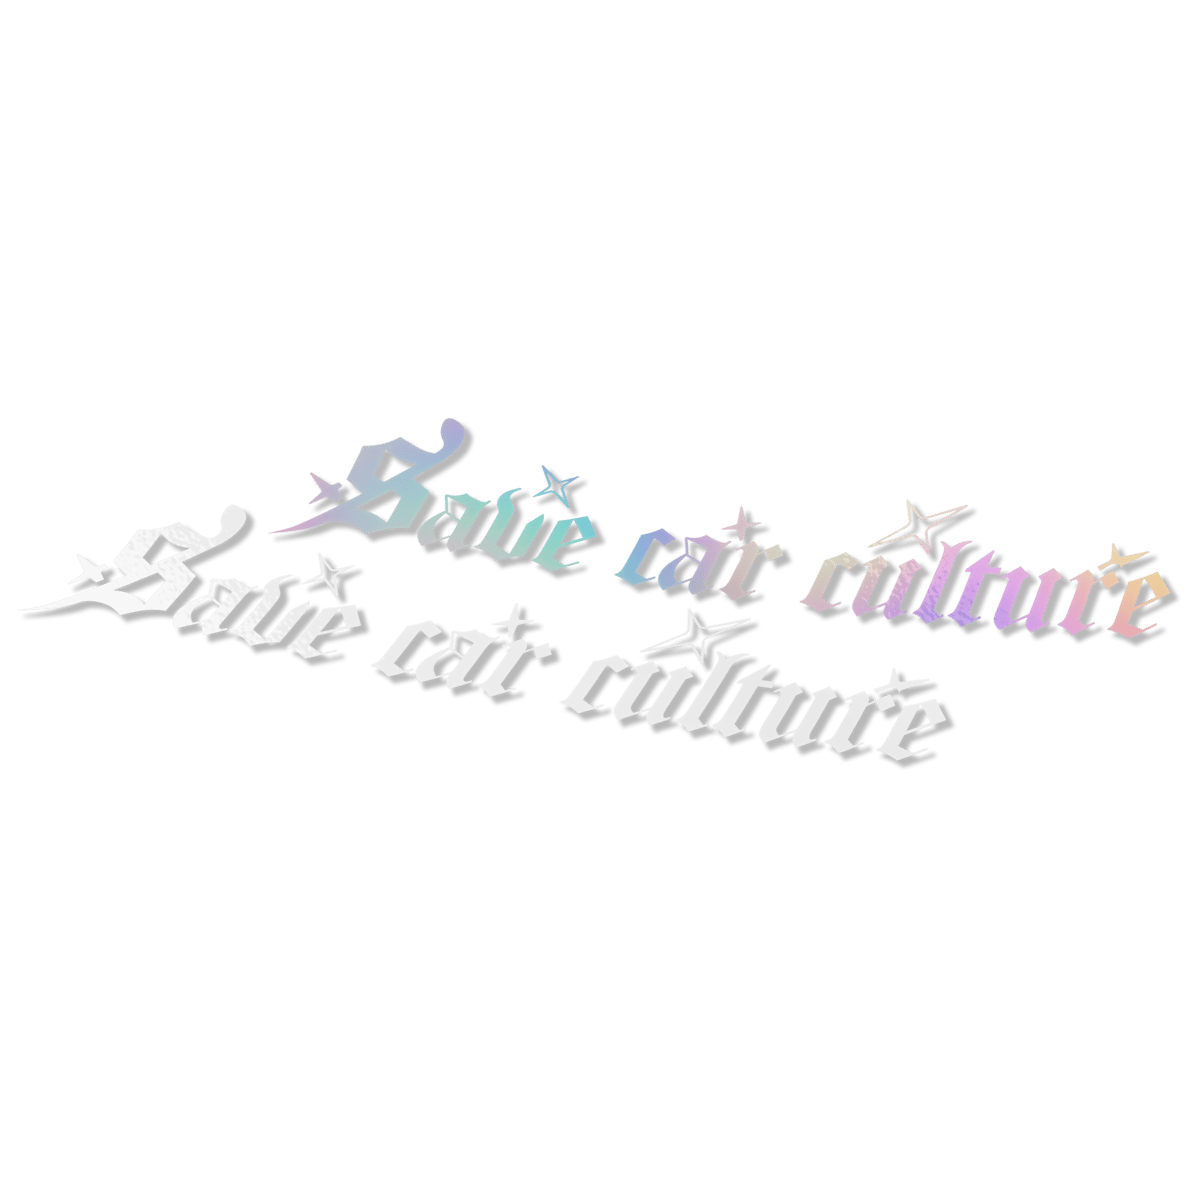 Image of Save Car Culture Decal